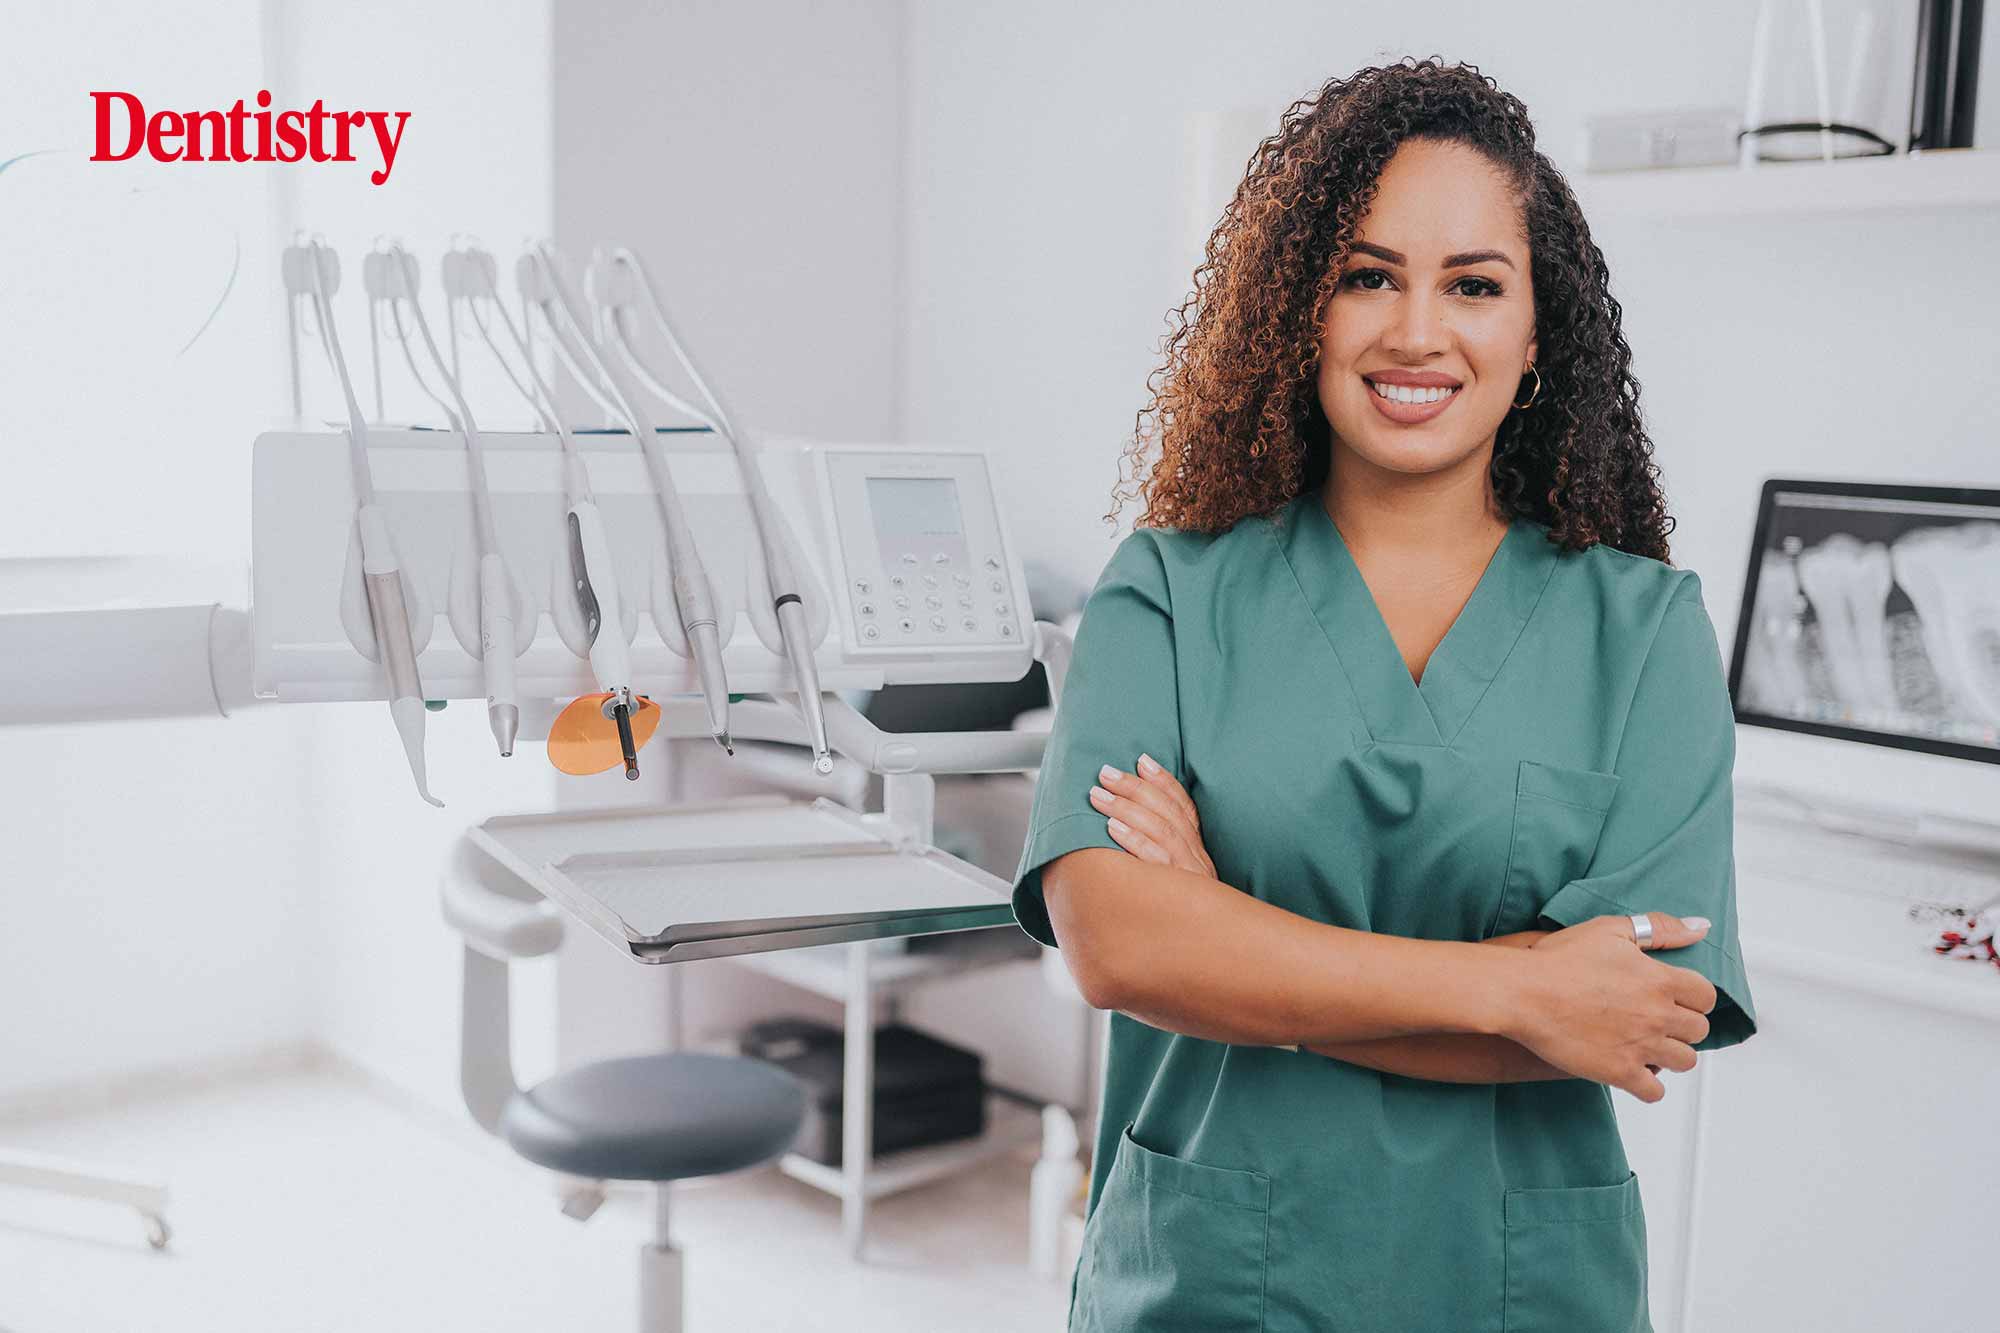 Culture change in dentistry crucial to improve working lives of women